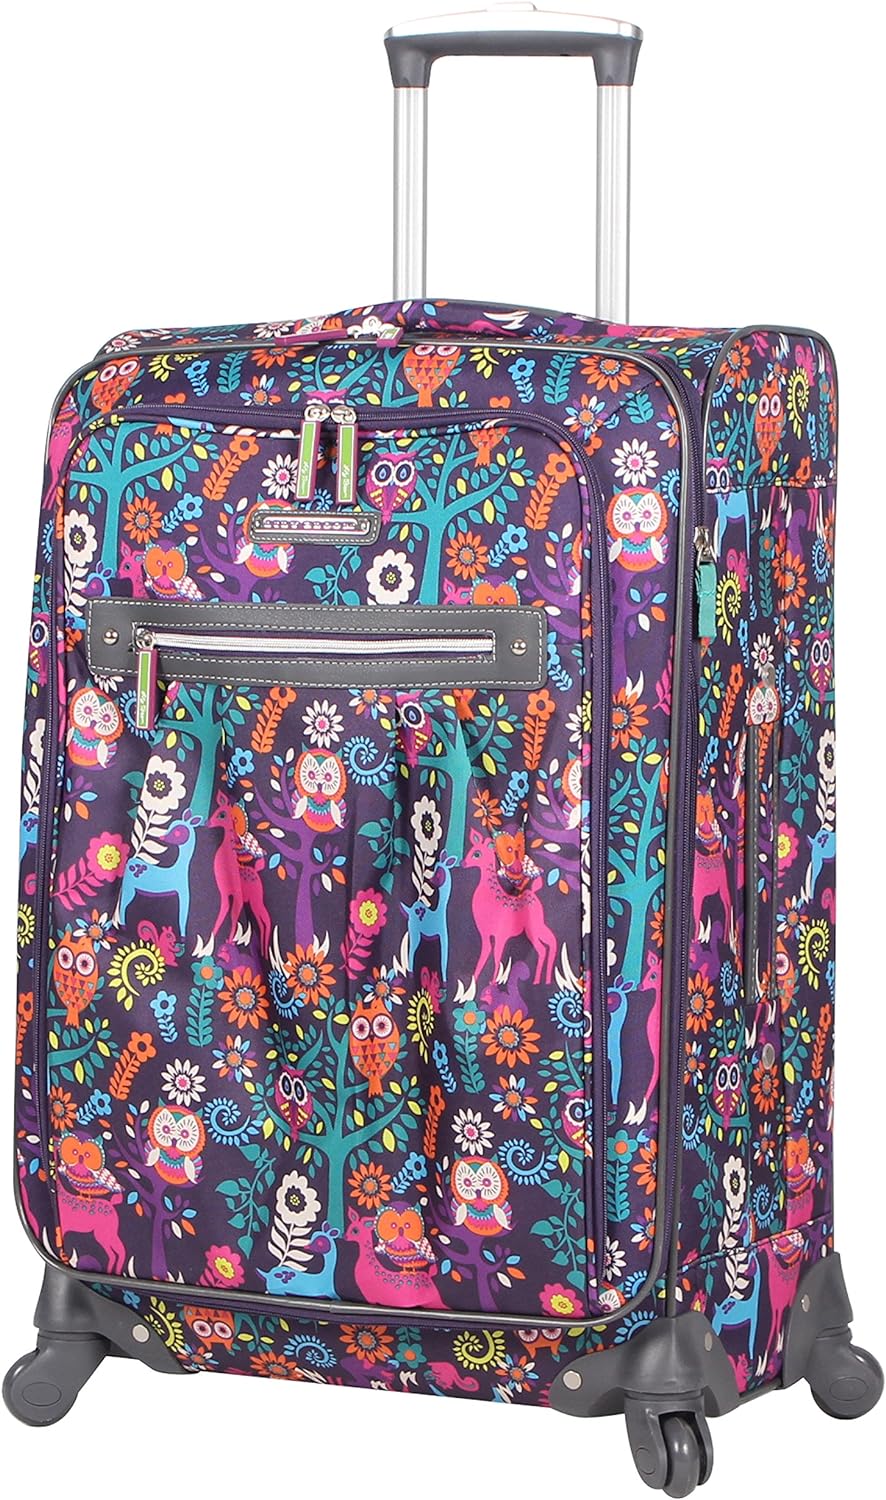 24in, Playful Garden Lily Bloom Luggage 24 Expandable Design Pattern Suitcase With Spinner Wheels For Woman